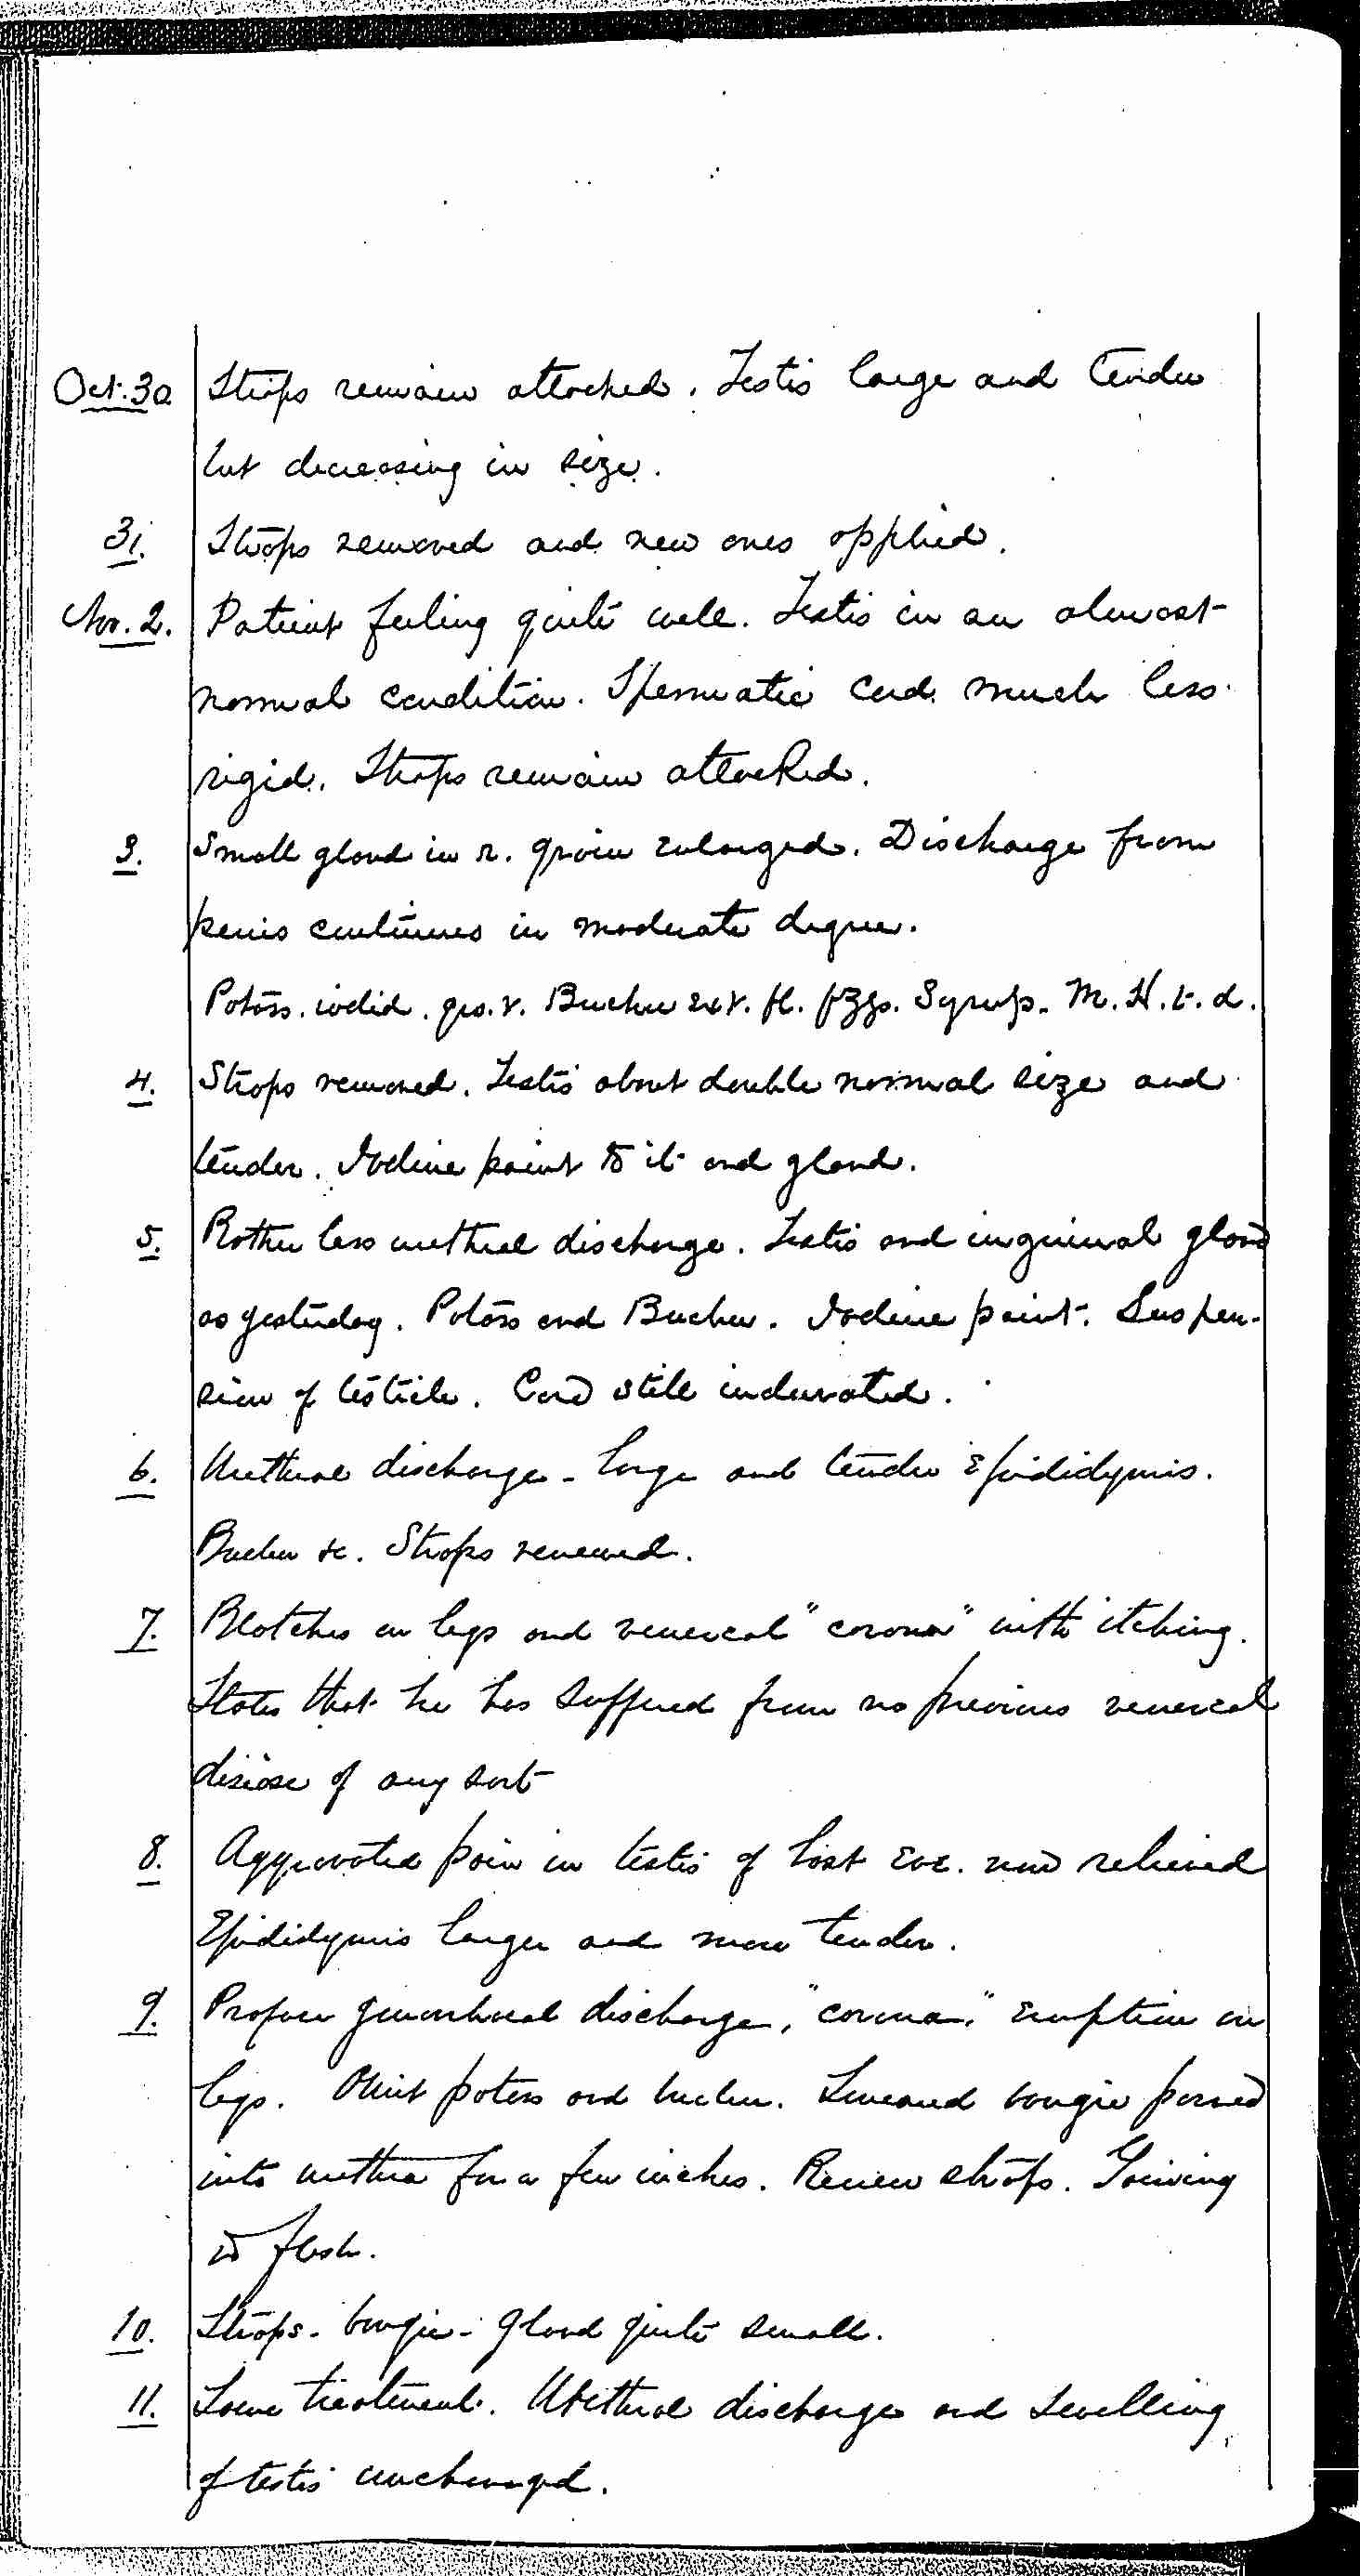 Entry for Robert Mellor (first admission page 4 of 9) in the log Hospital Tickets and Case Papers - Naval Hospital - Washington, D.C. - 1868-69